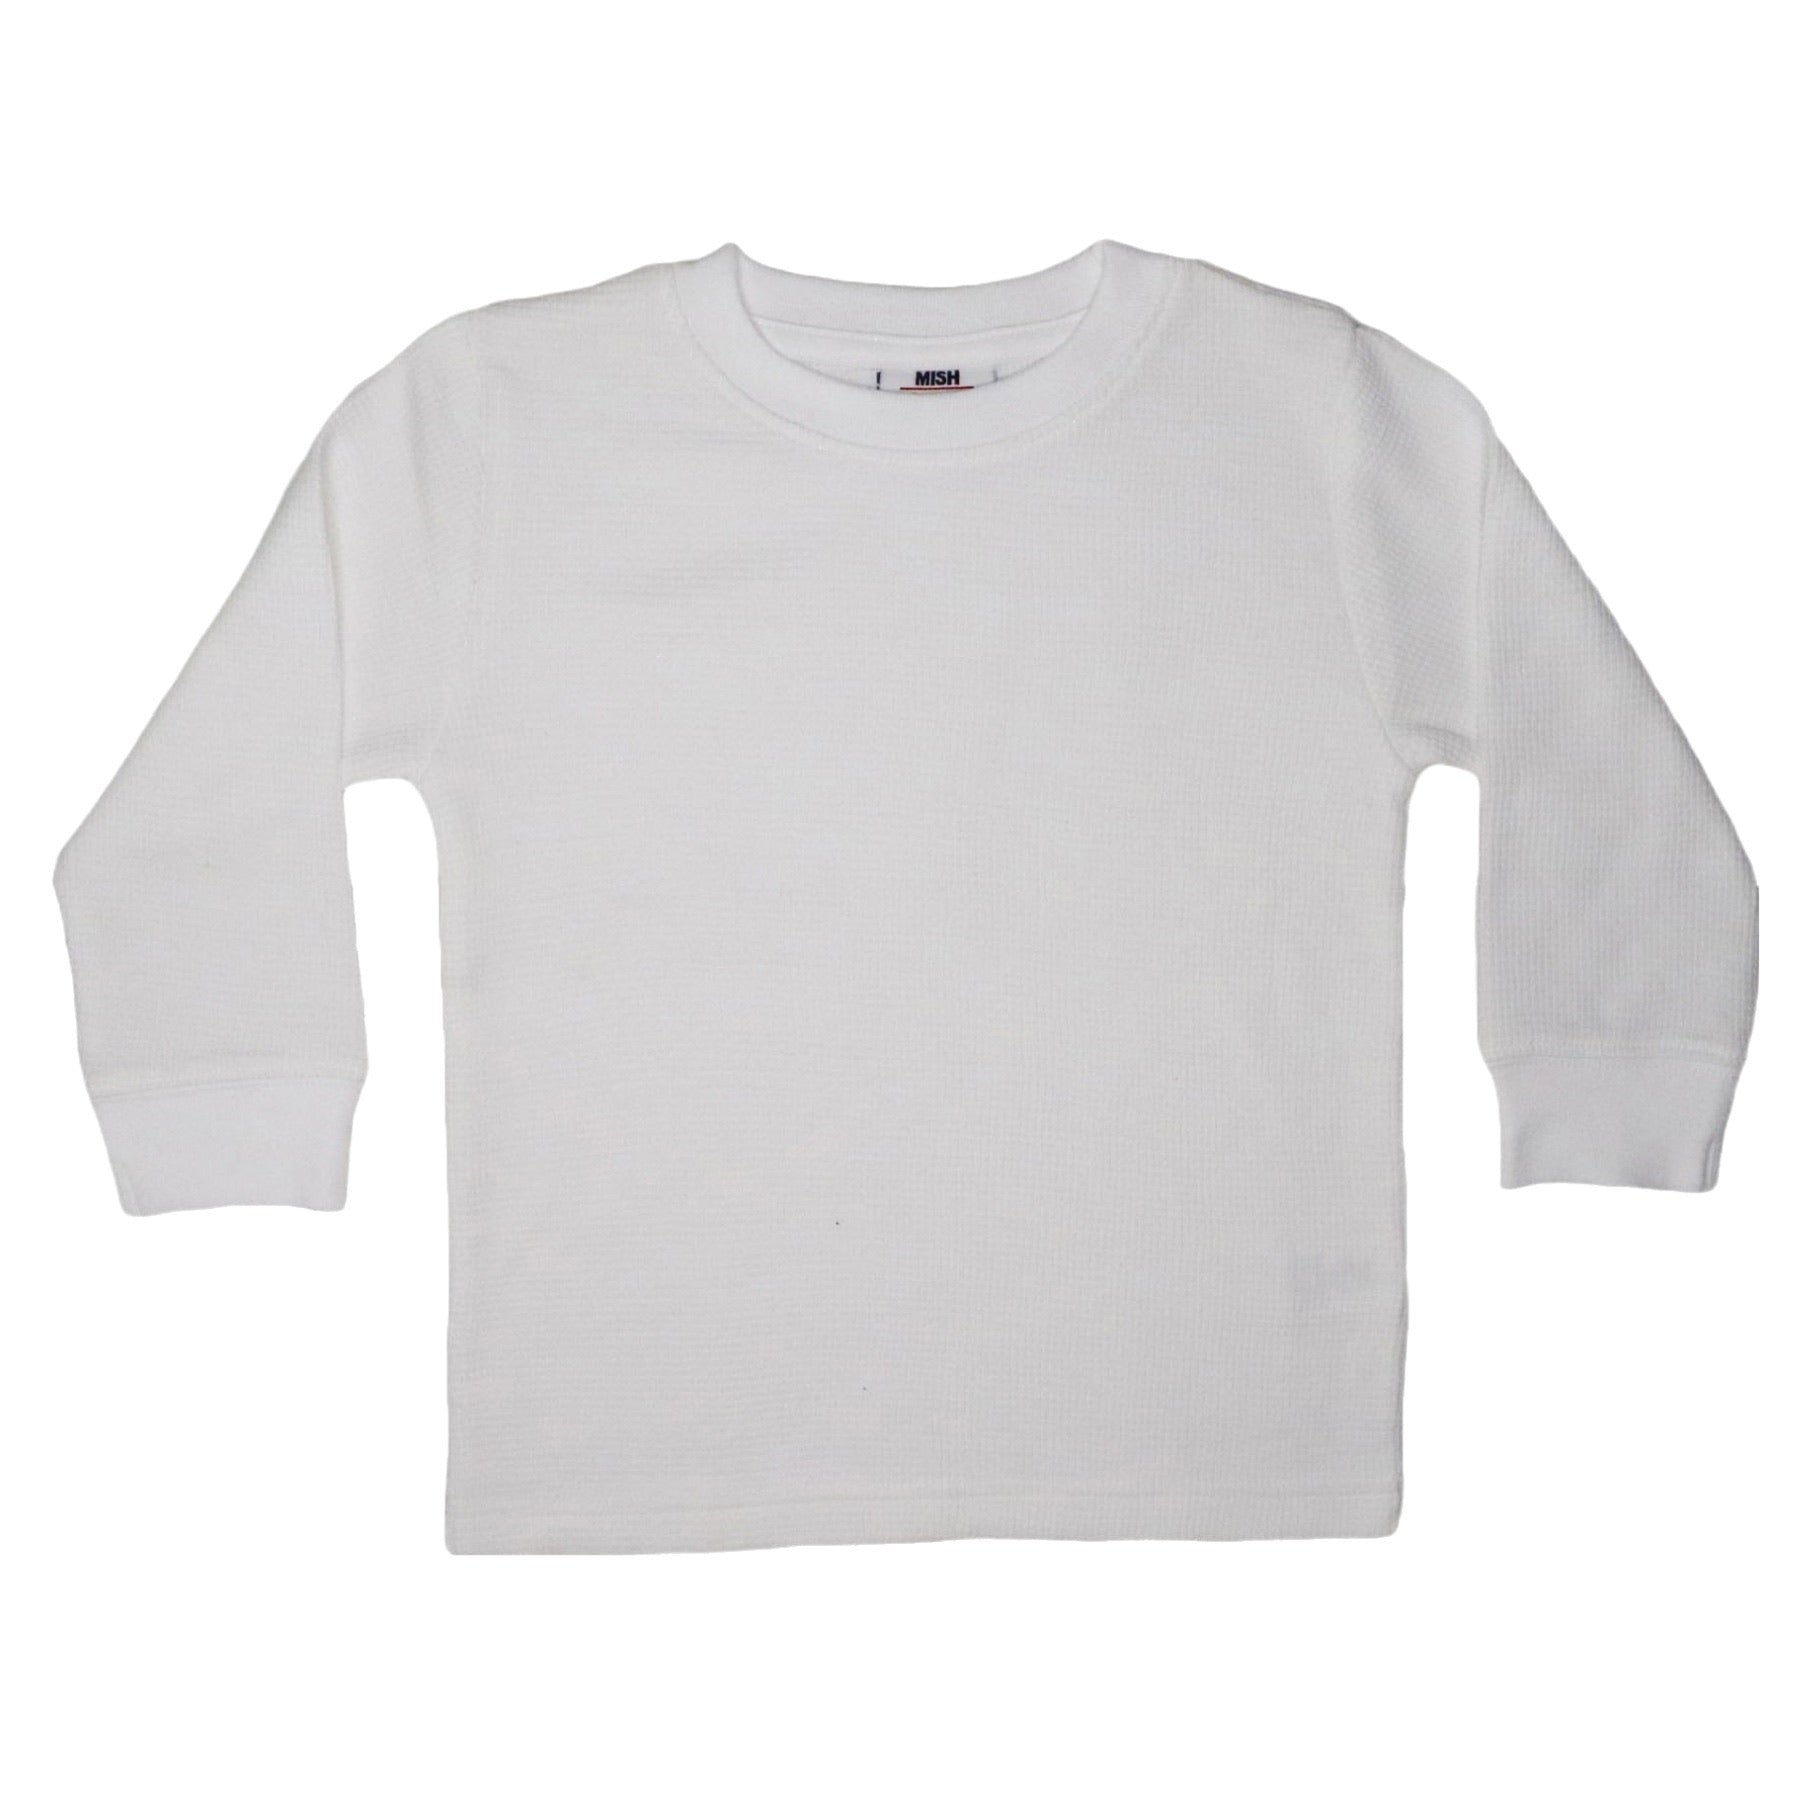 Kids Thermal Long Sleeve Solid Shirt - White